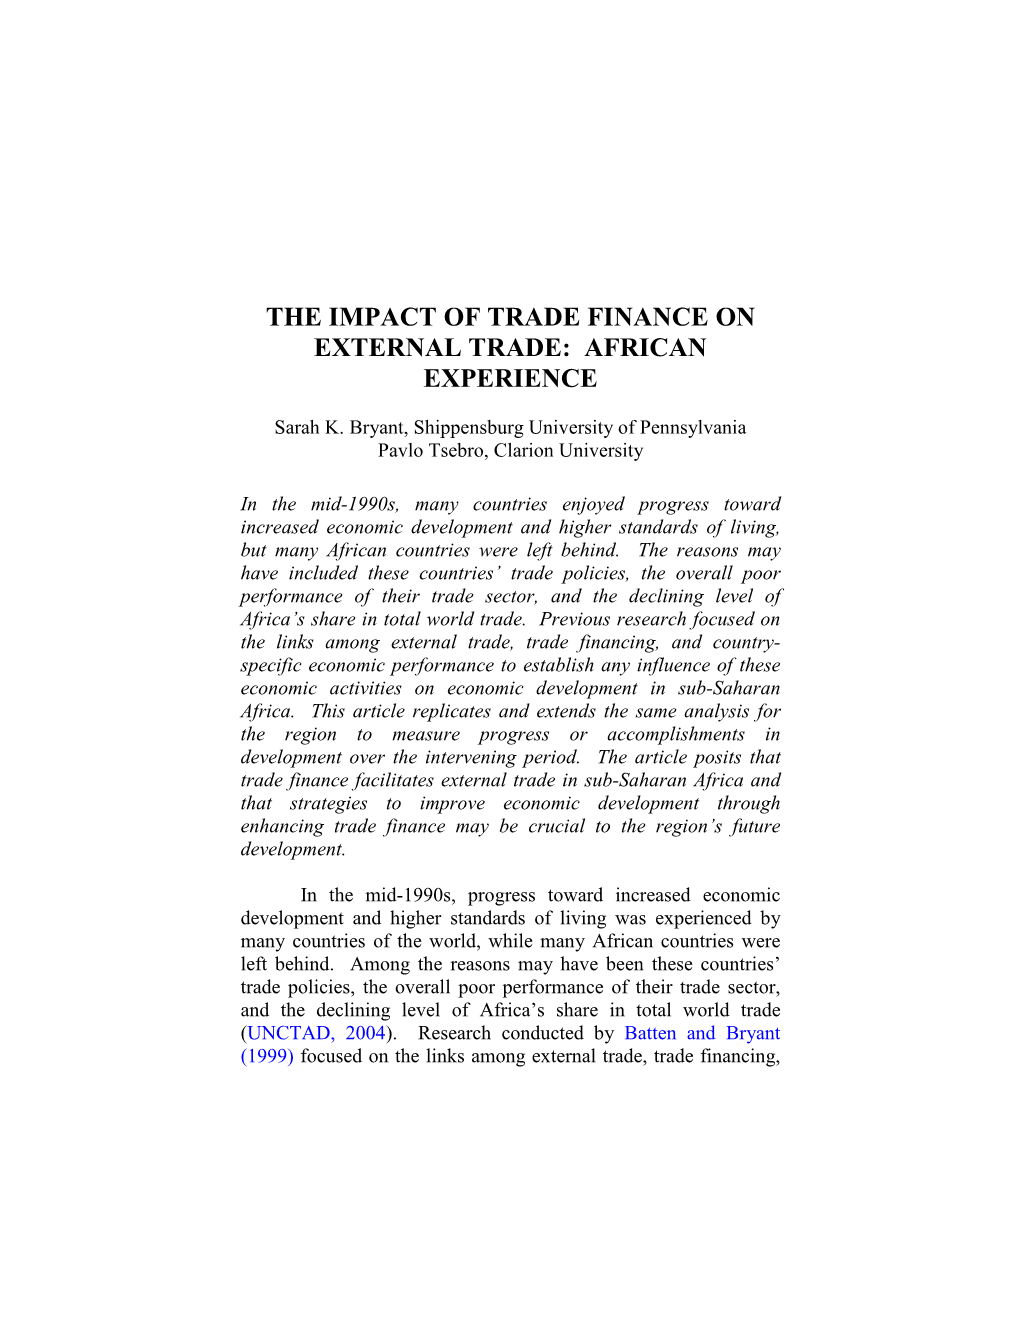 Trade Finance and External Trade in Selected Sub-Saharan African